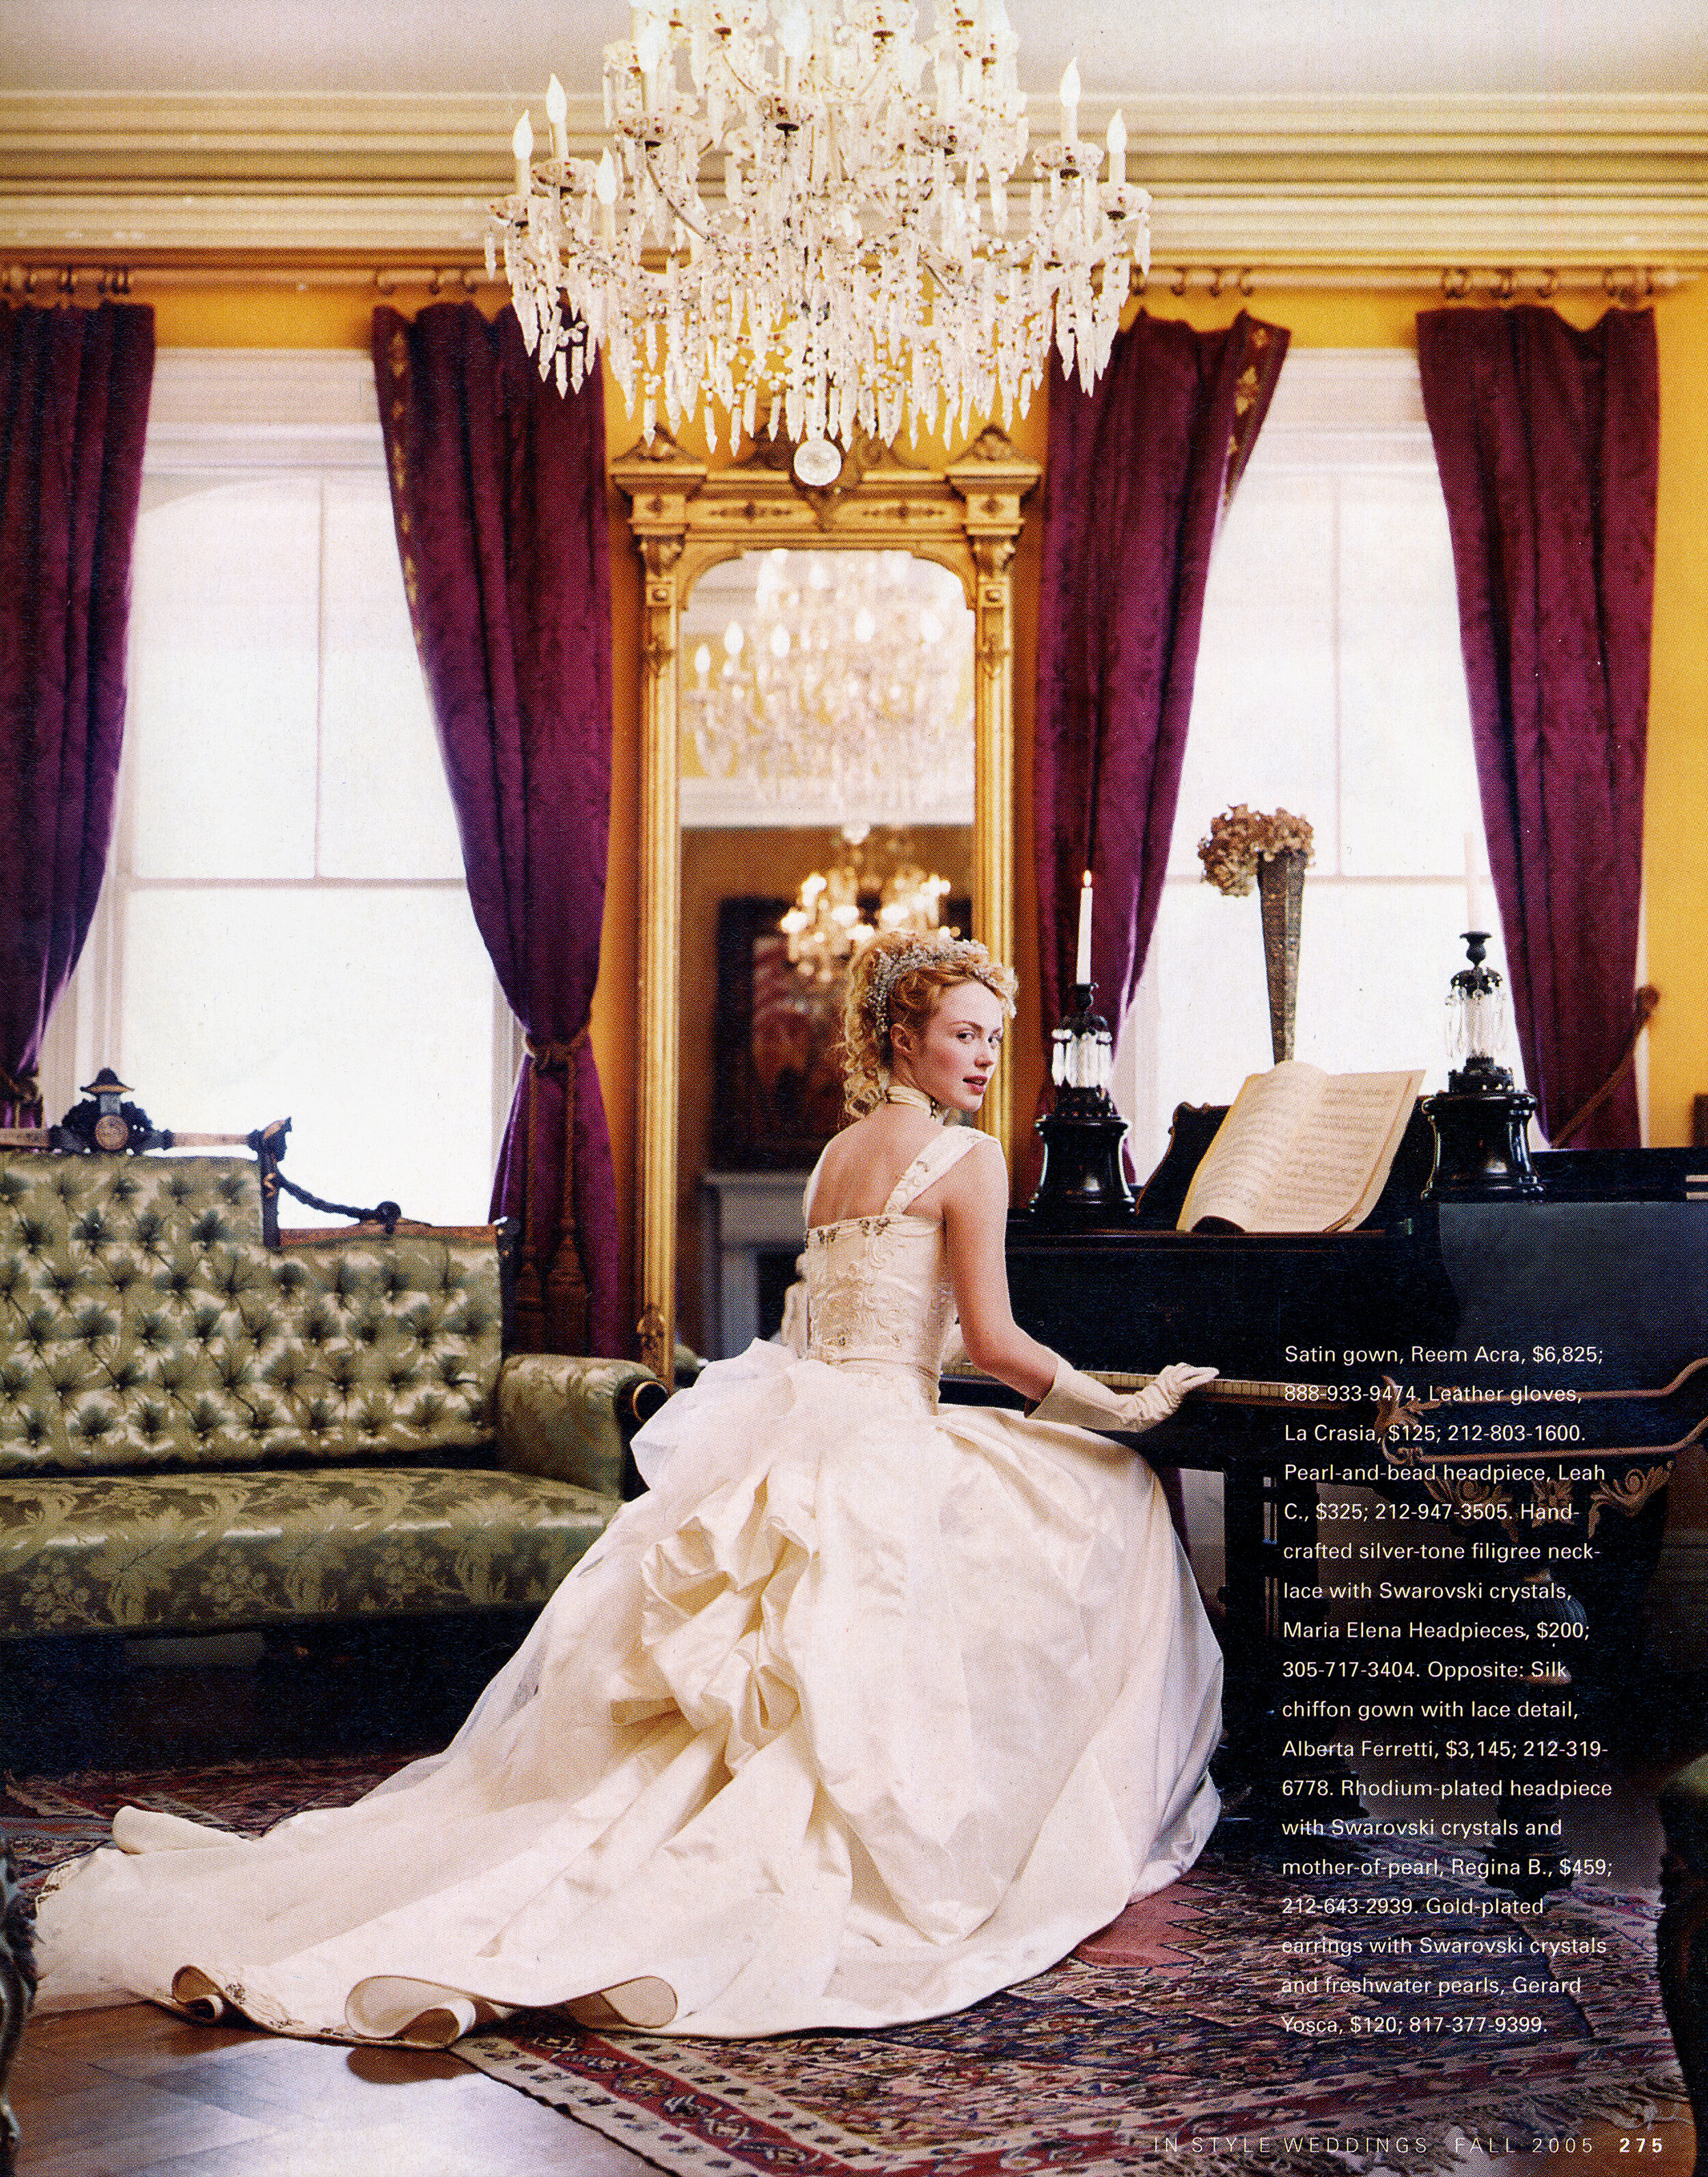 Instyle_Victorian_piano.jpeg